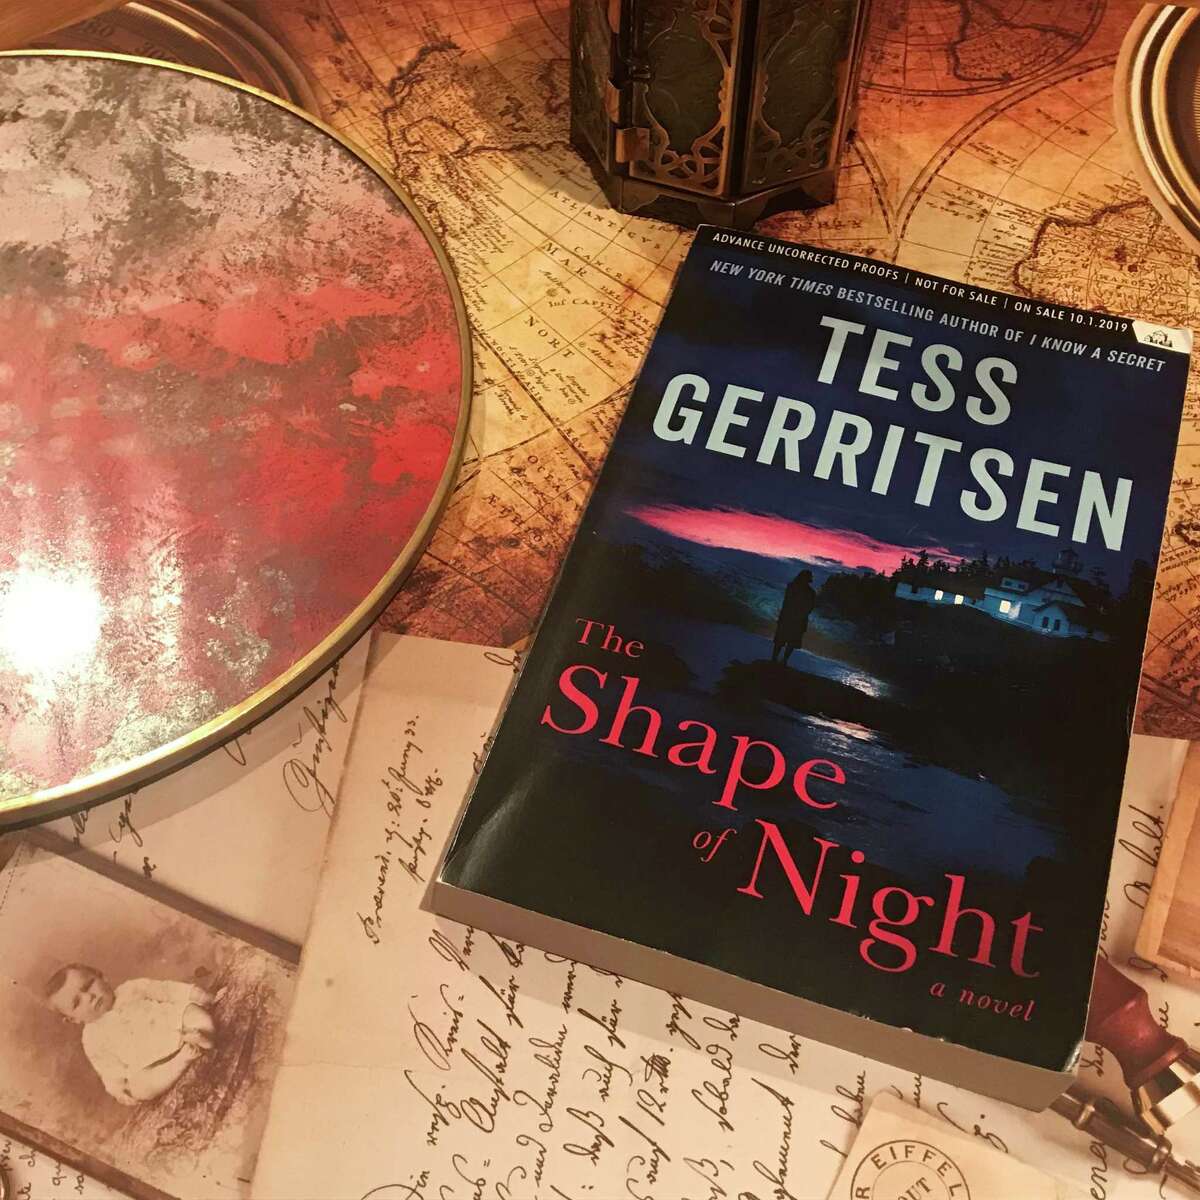 “The Shape of Night” by Tess Gerritsen was published in October.